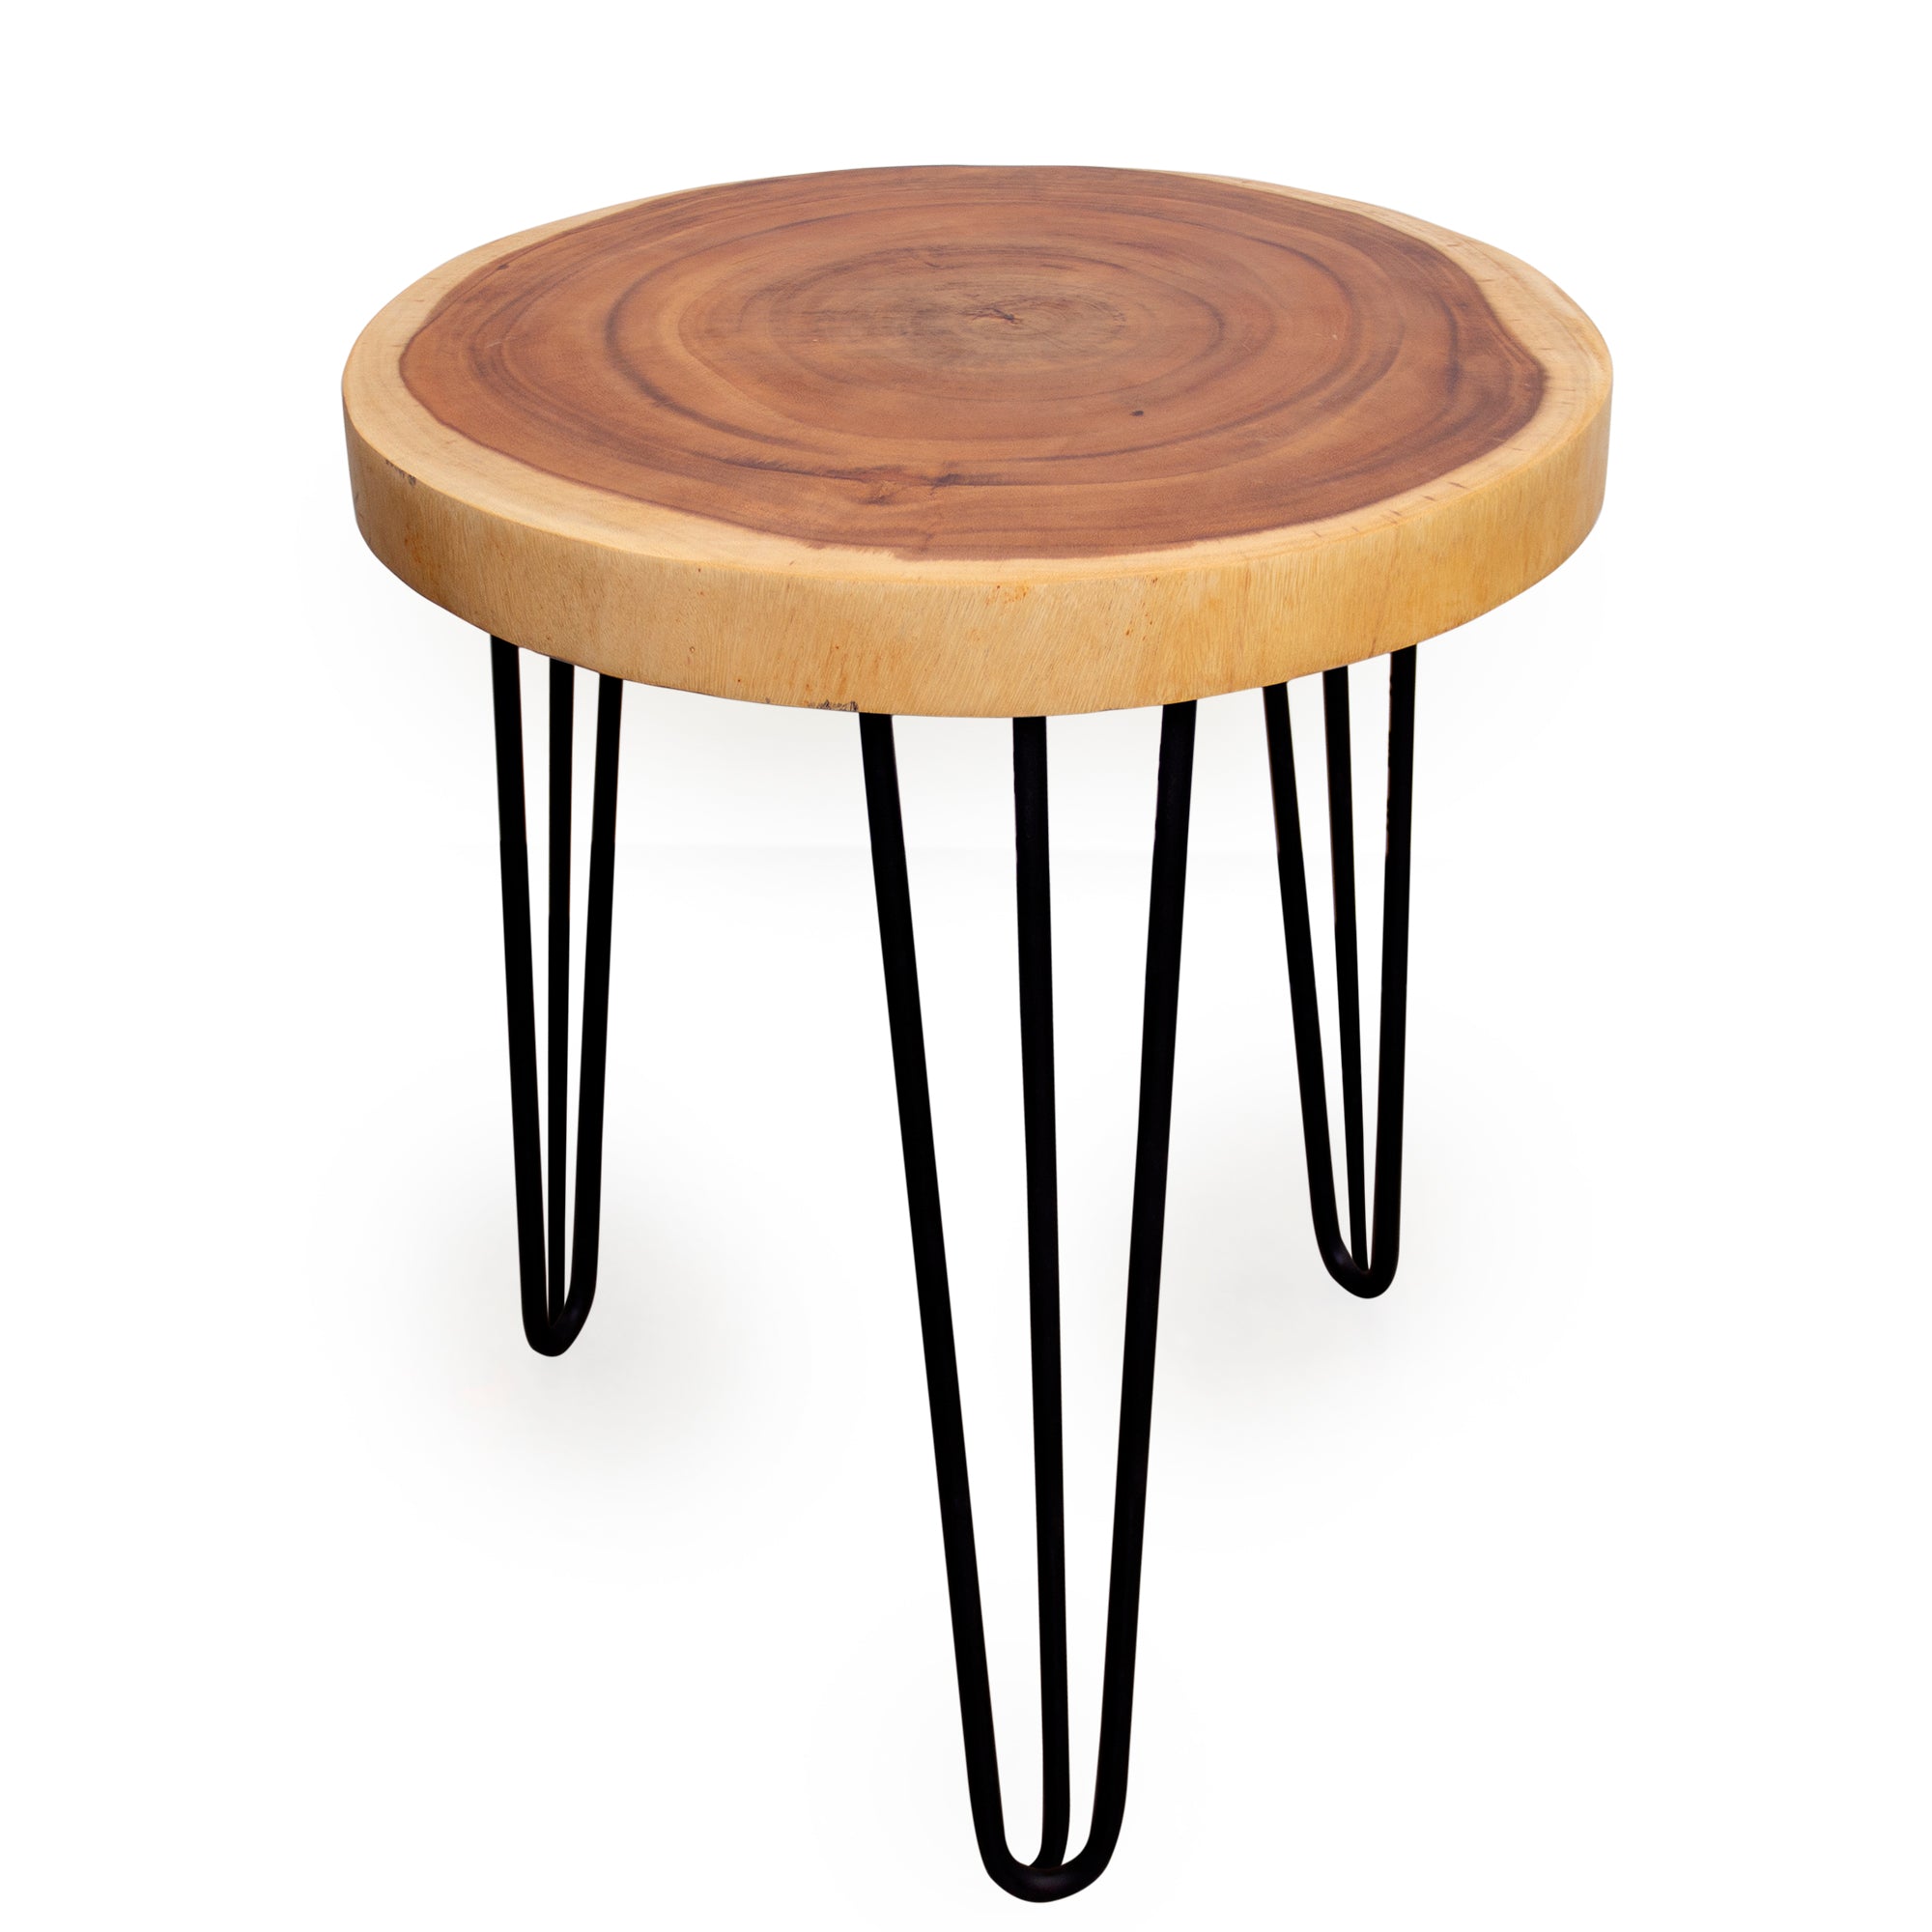 Rain Wood Round Accent Table